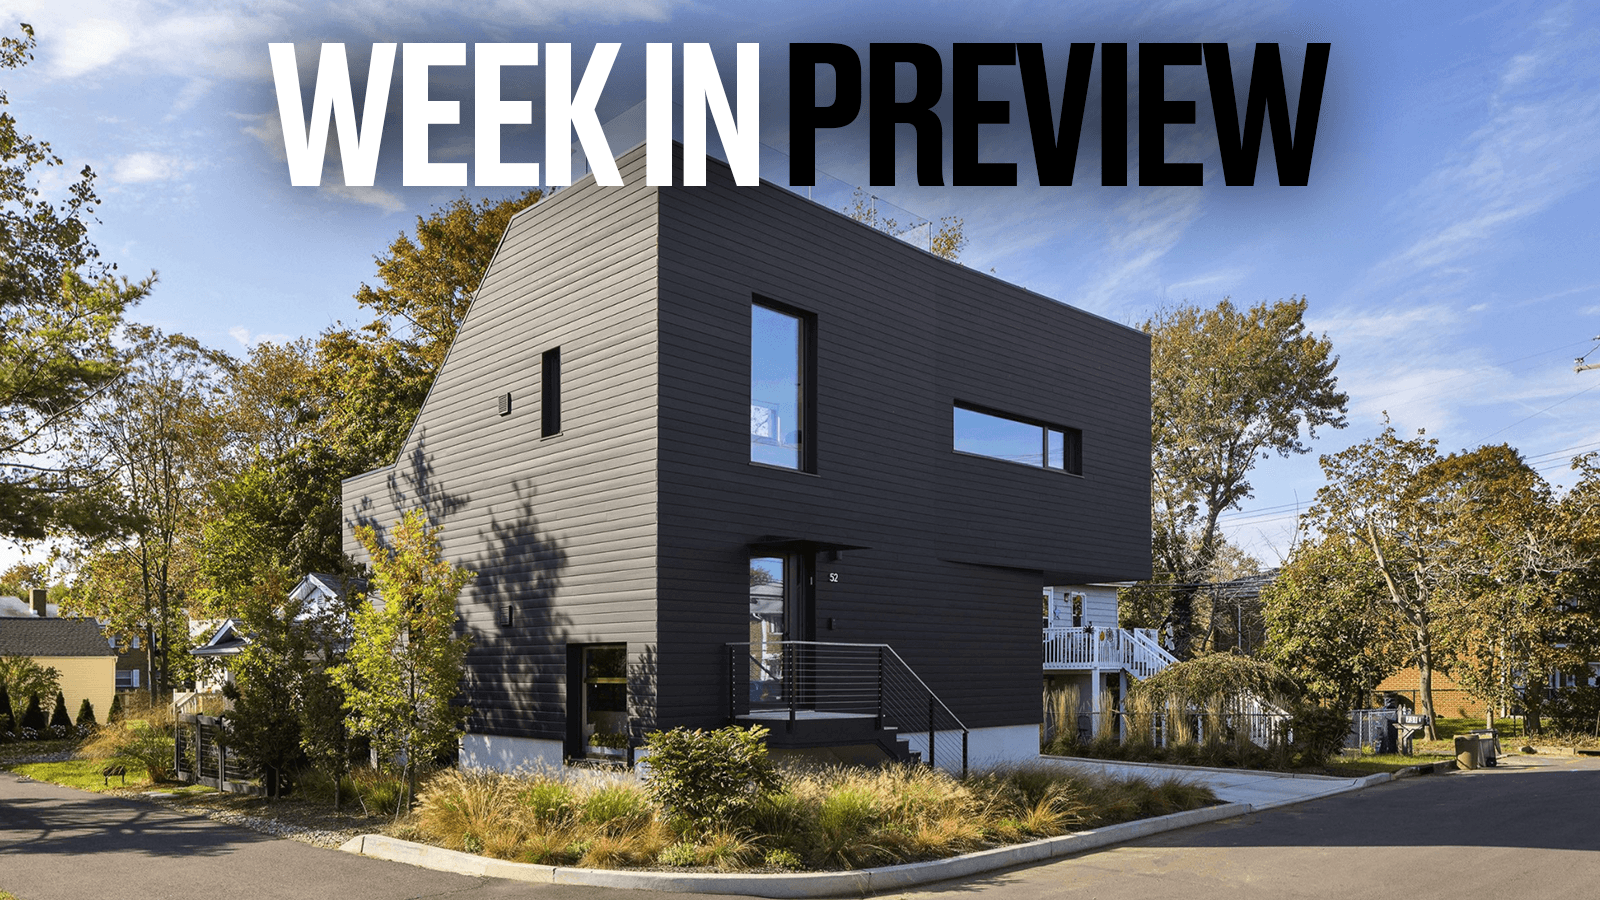 Passive House Week In Preview: November 22